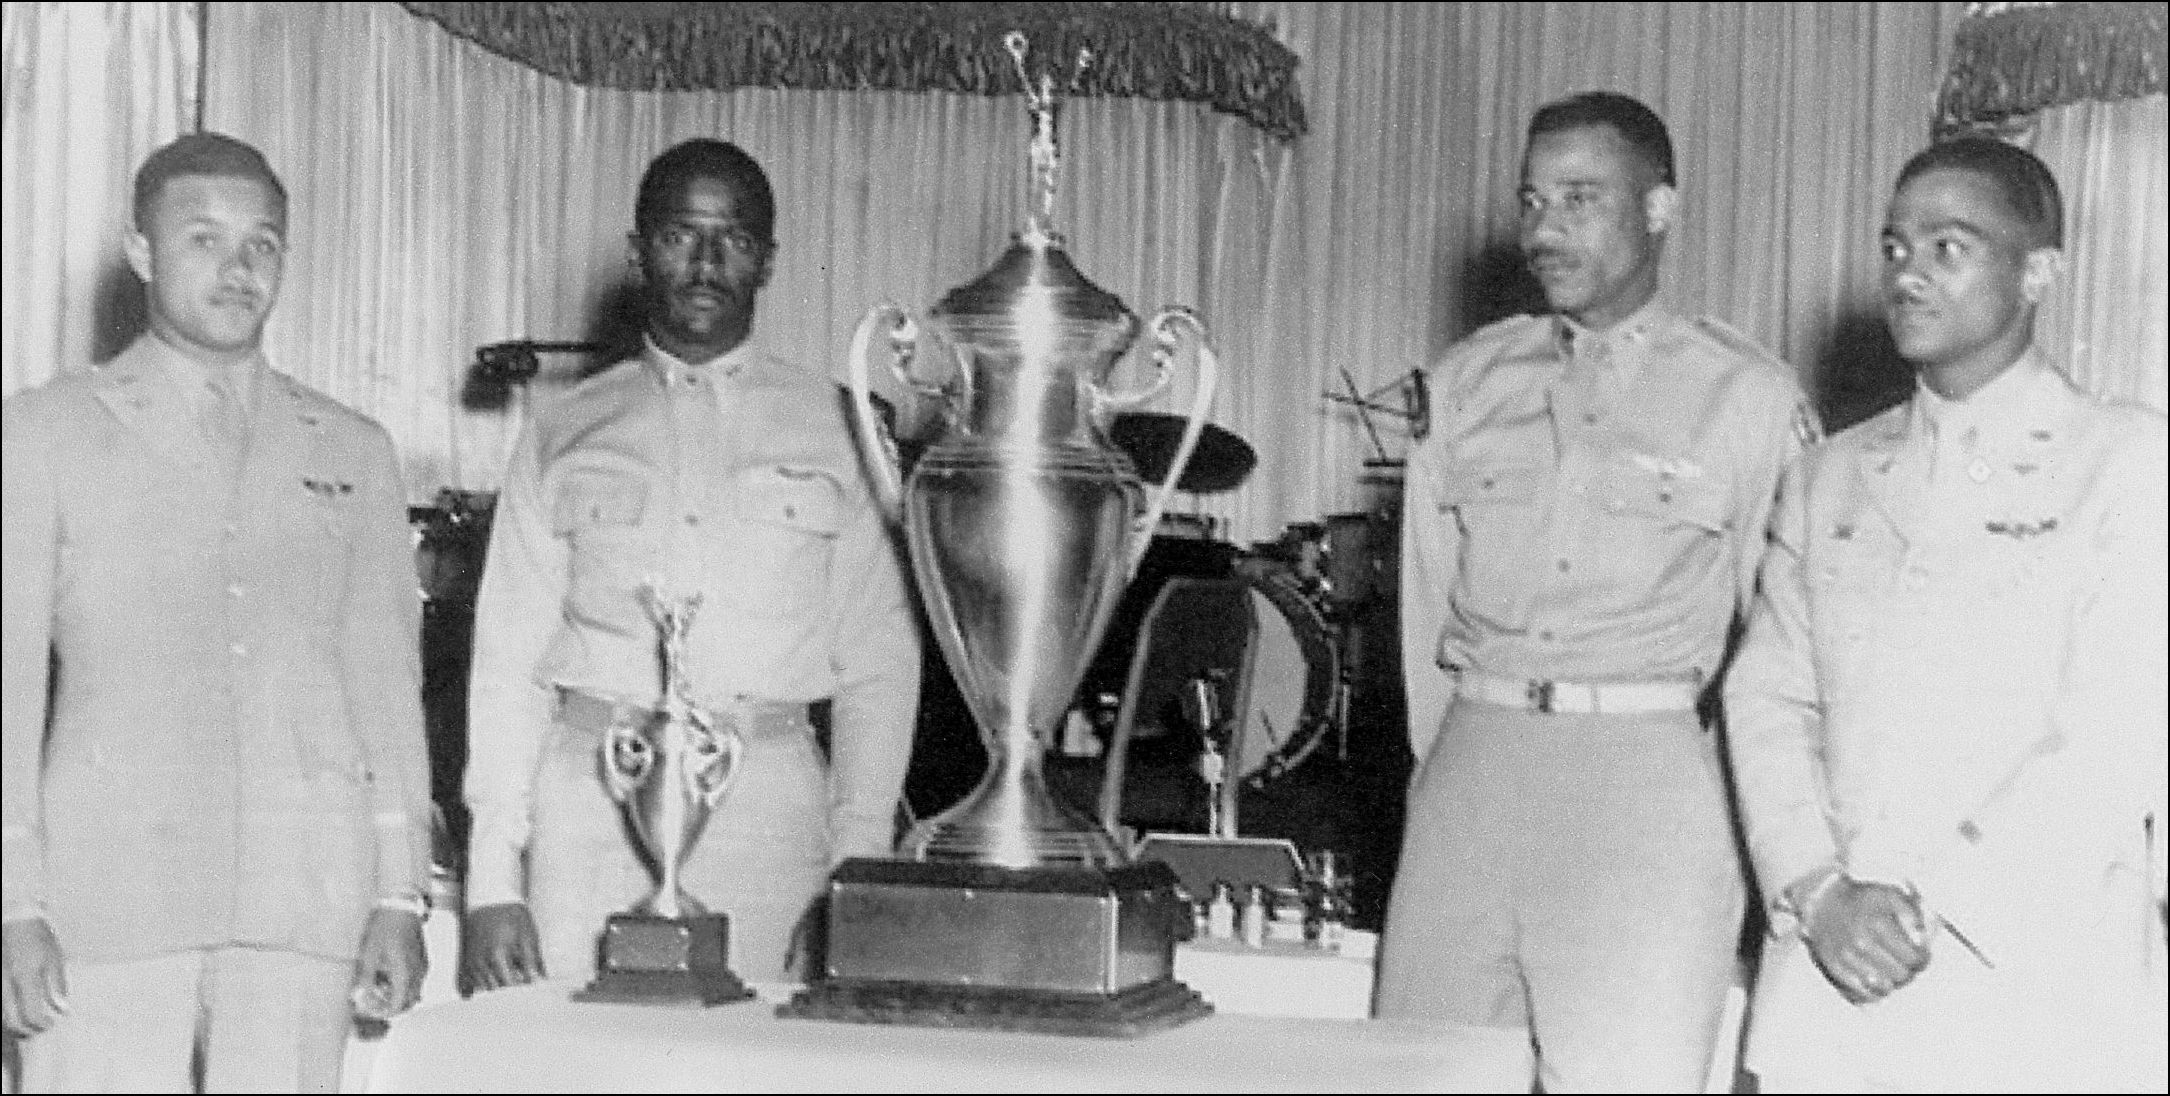 Stewart (right) and three other Tuskegee airmen pose with their trophy after winning the first Top Gun competition.